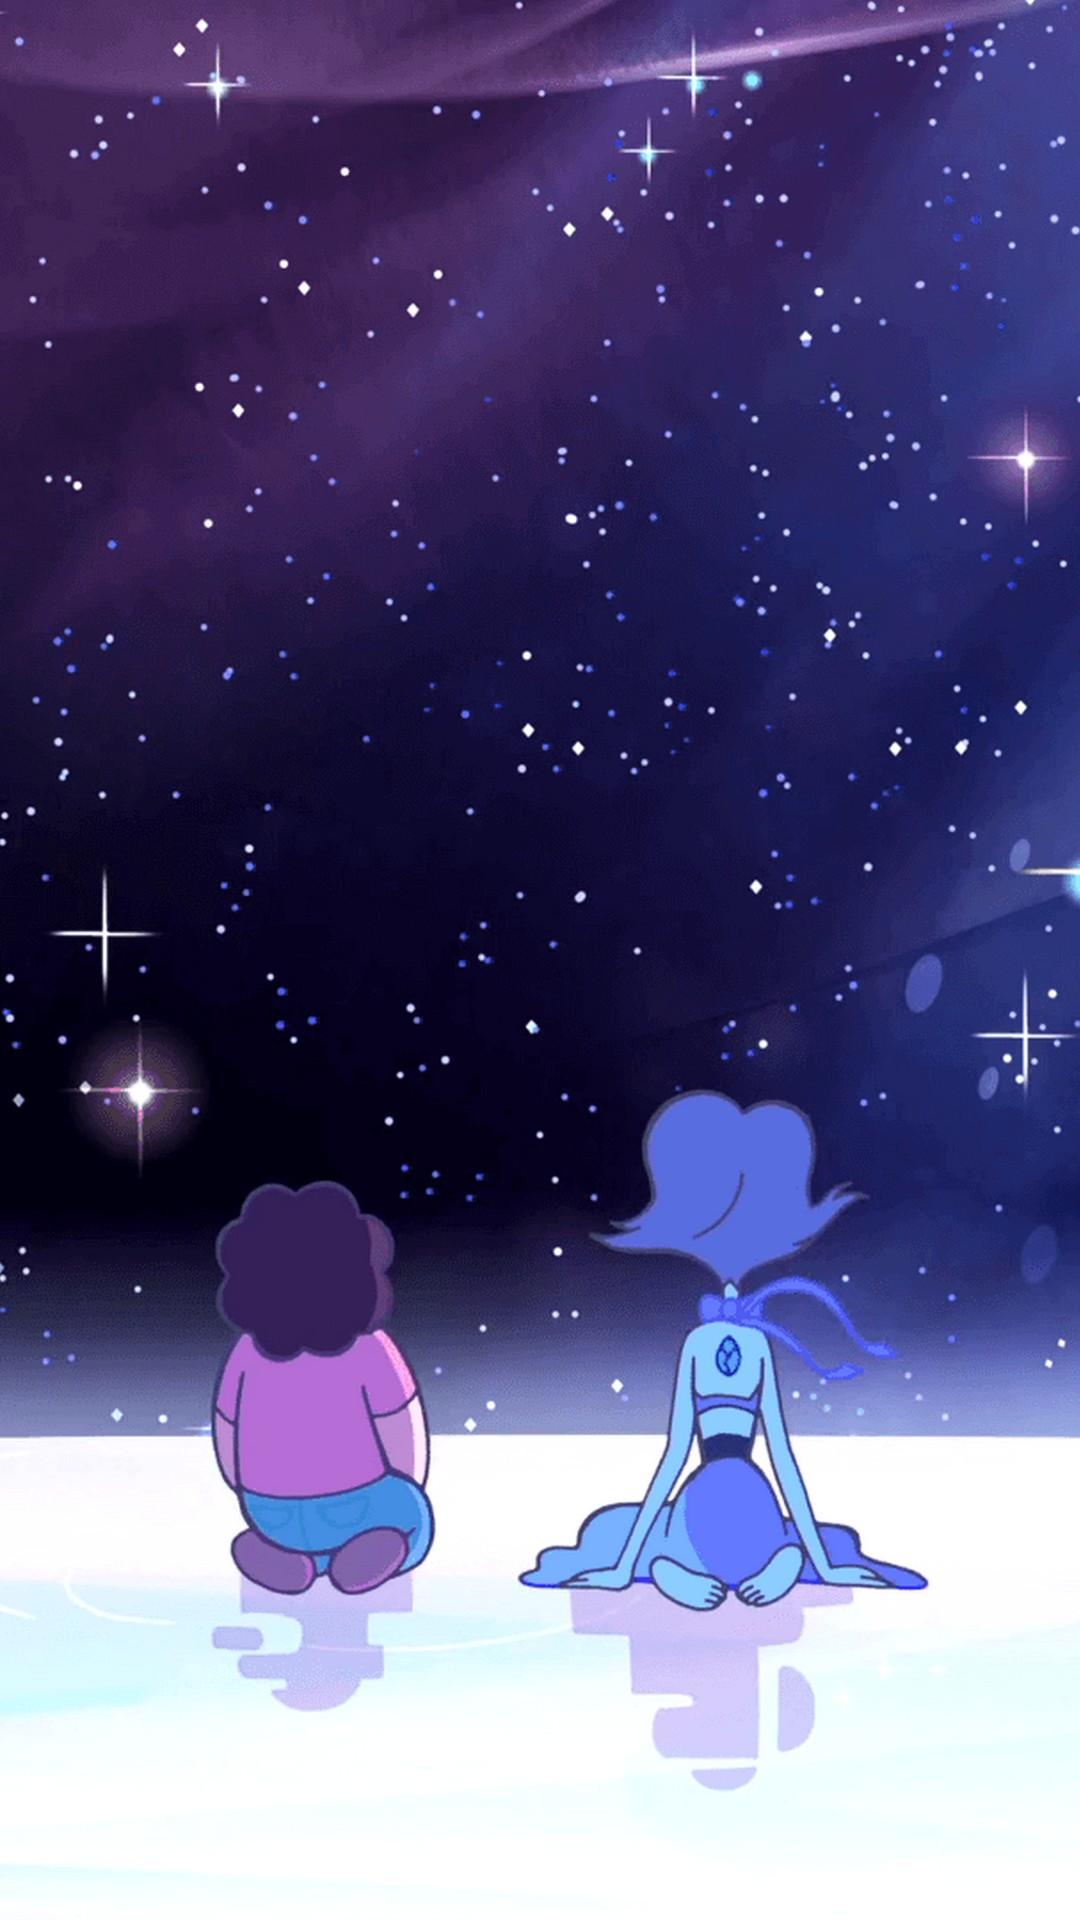 Steven Universe The Movie Wallpaper for iPhone 3D iPhone